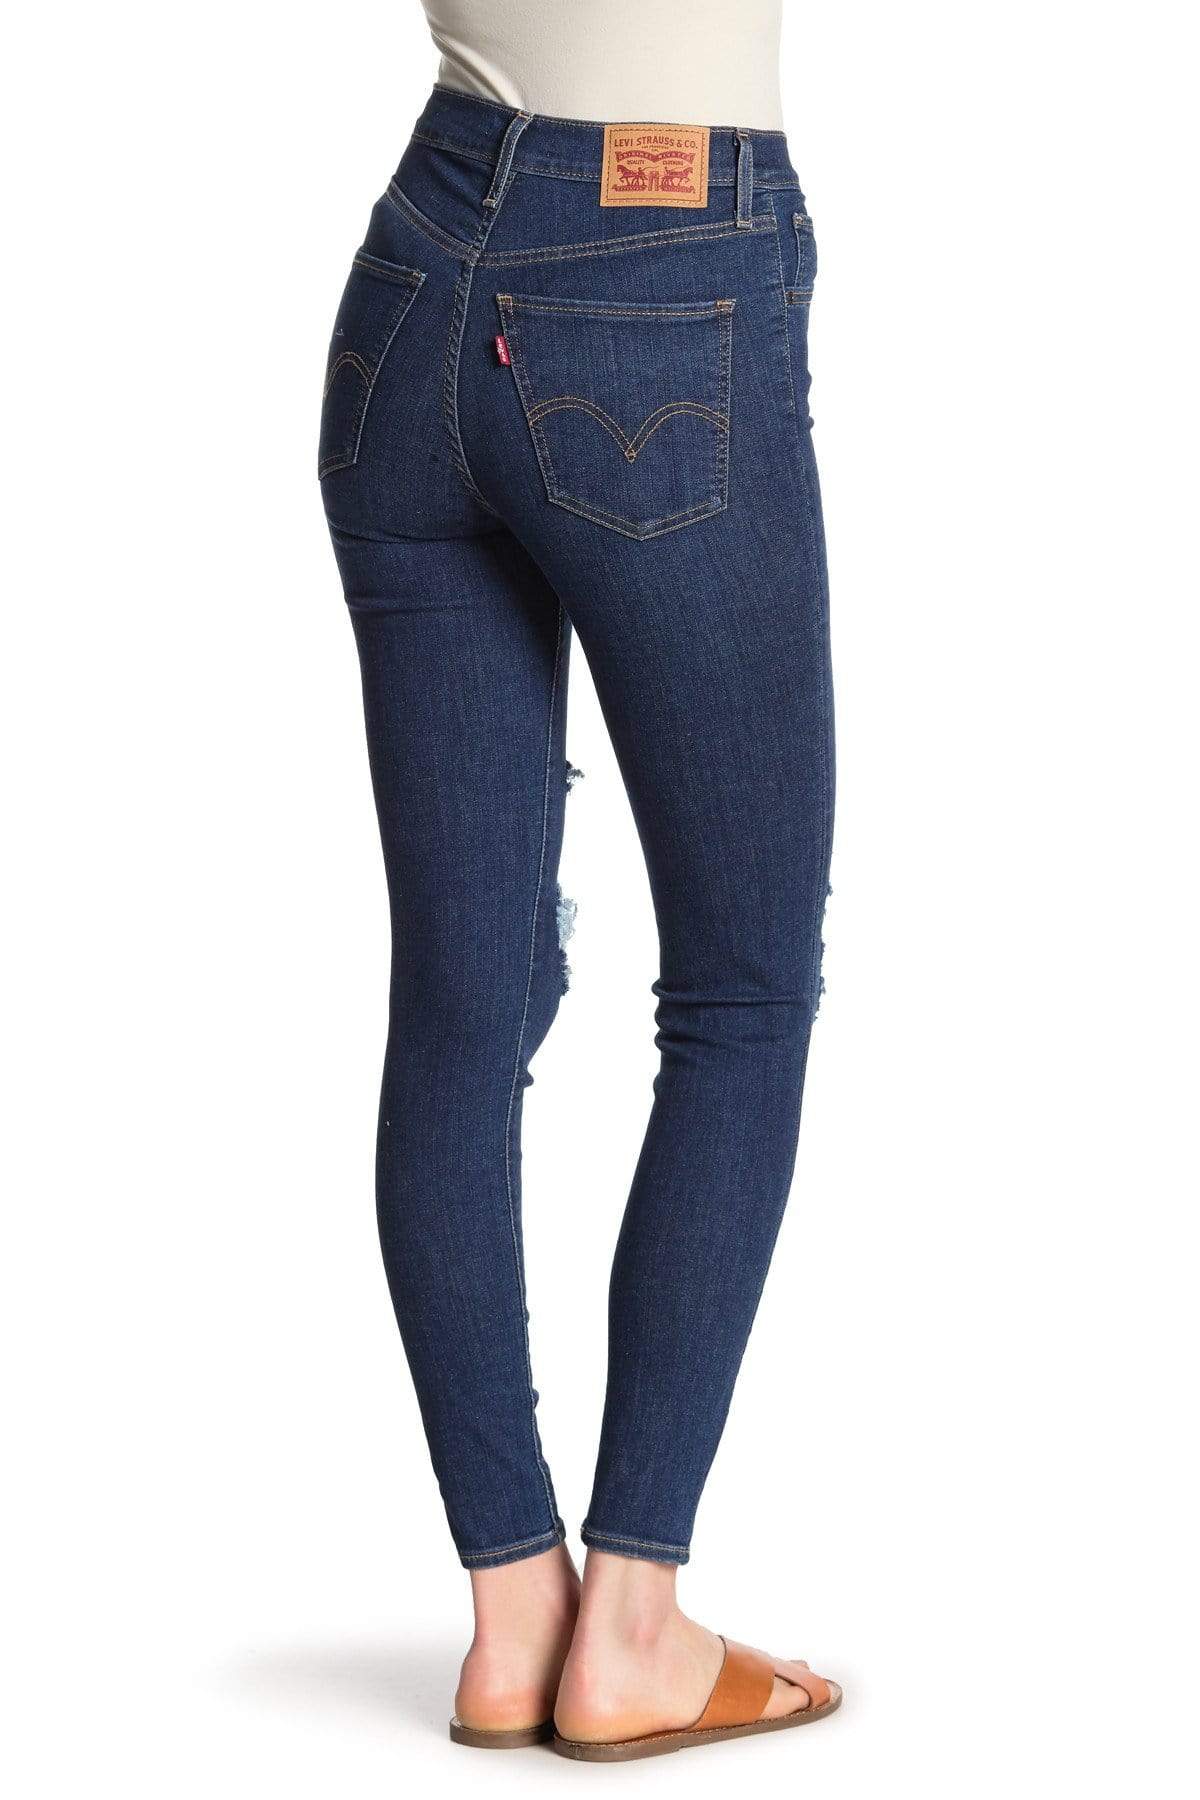 levis Womens Bottoms Mile High Super Skinny Jeans